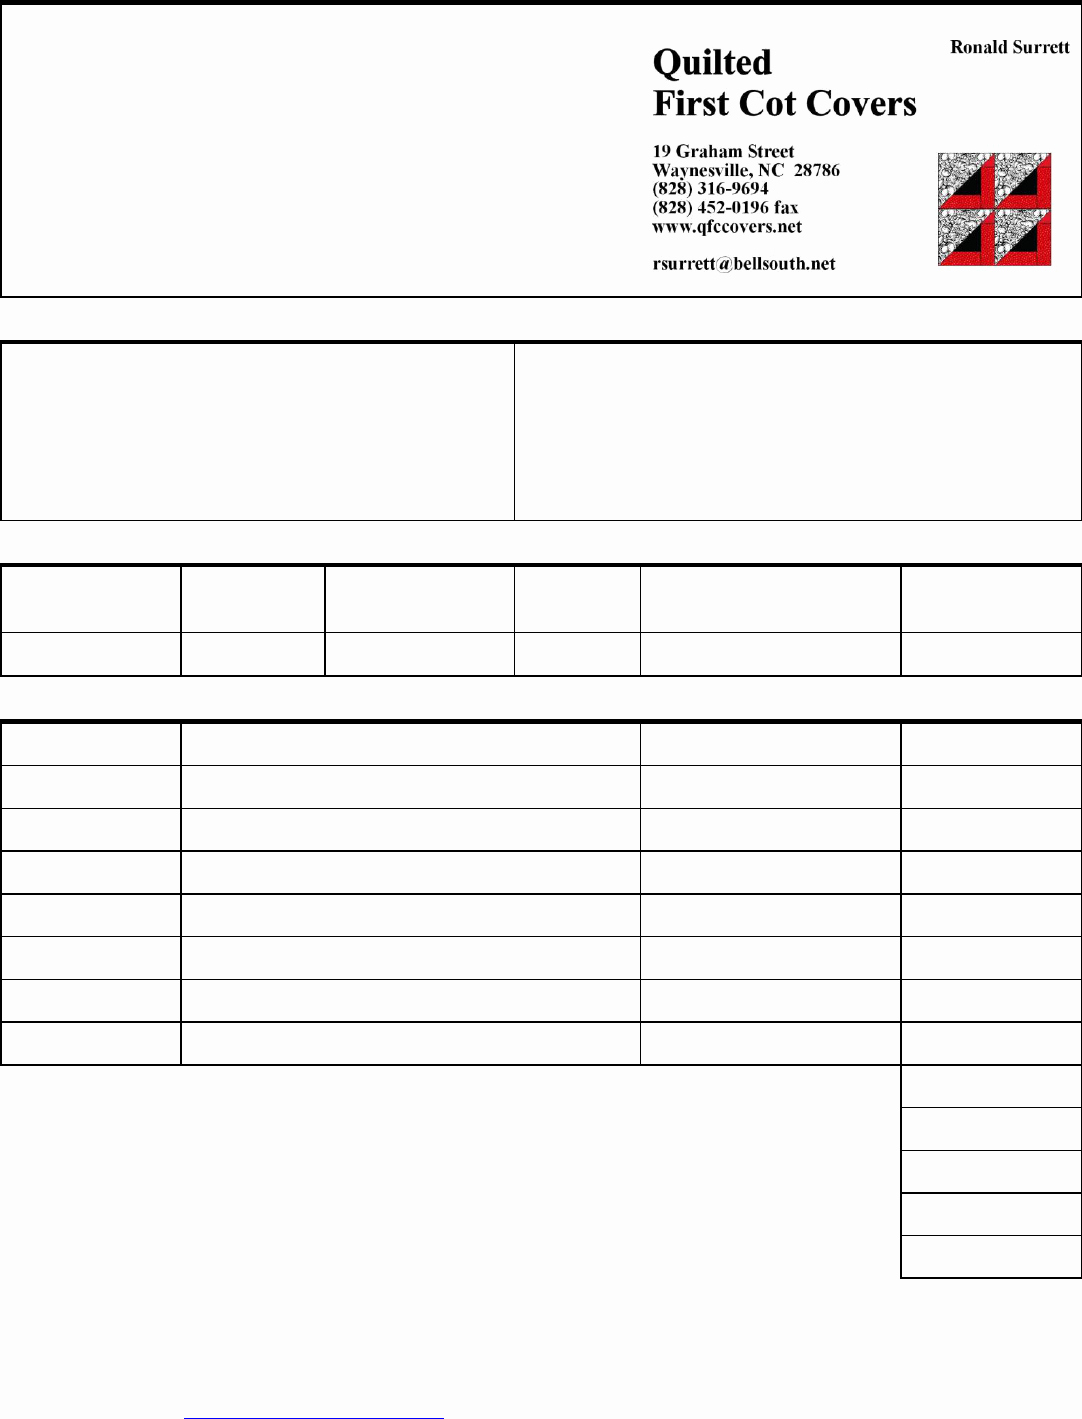 Blank Invoice Template Free Luxury Blank Invoices Invoice Design Inspiration